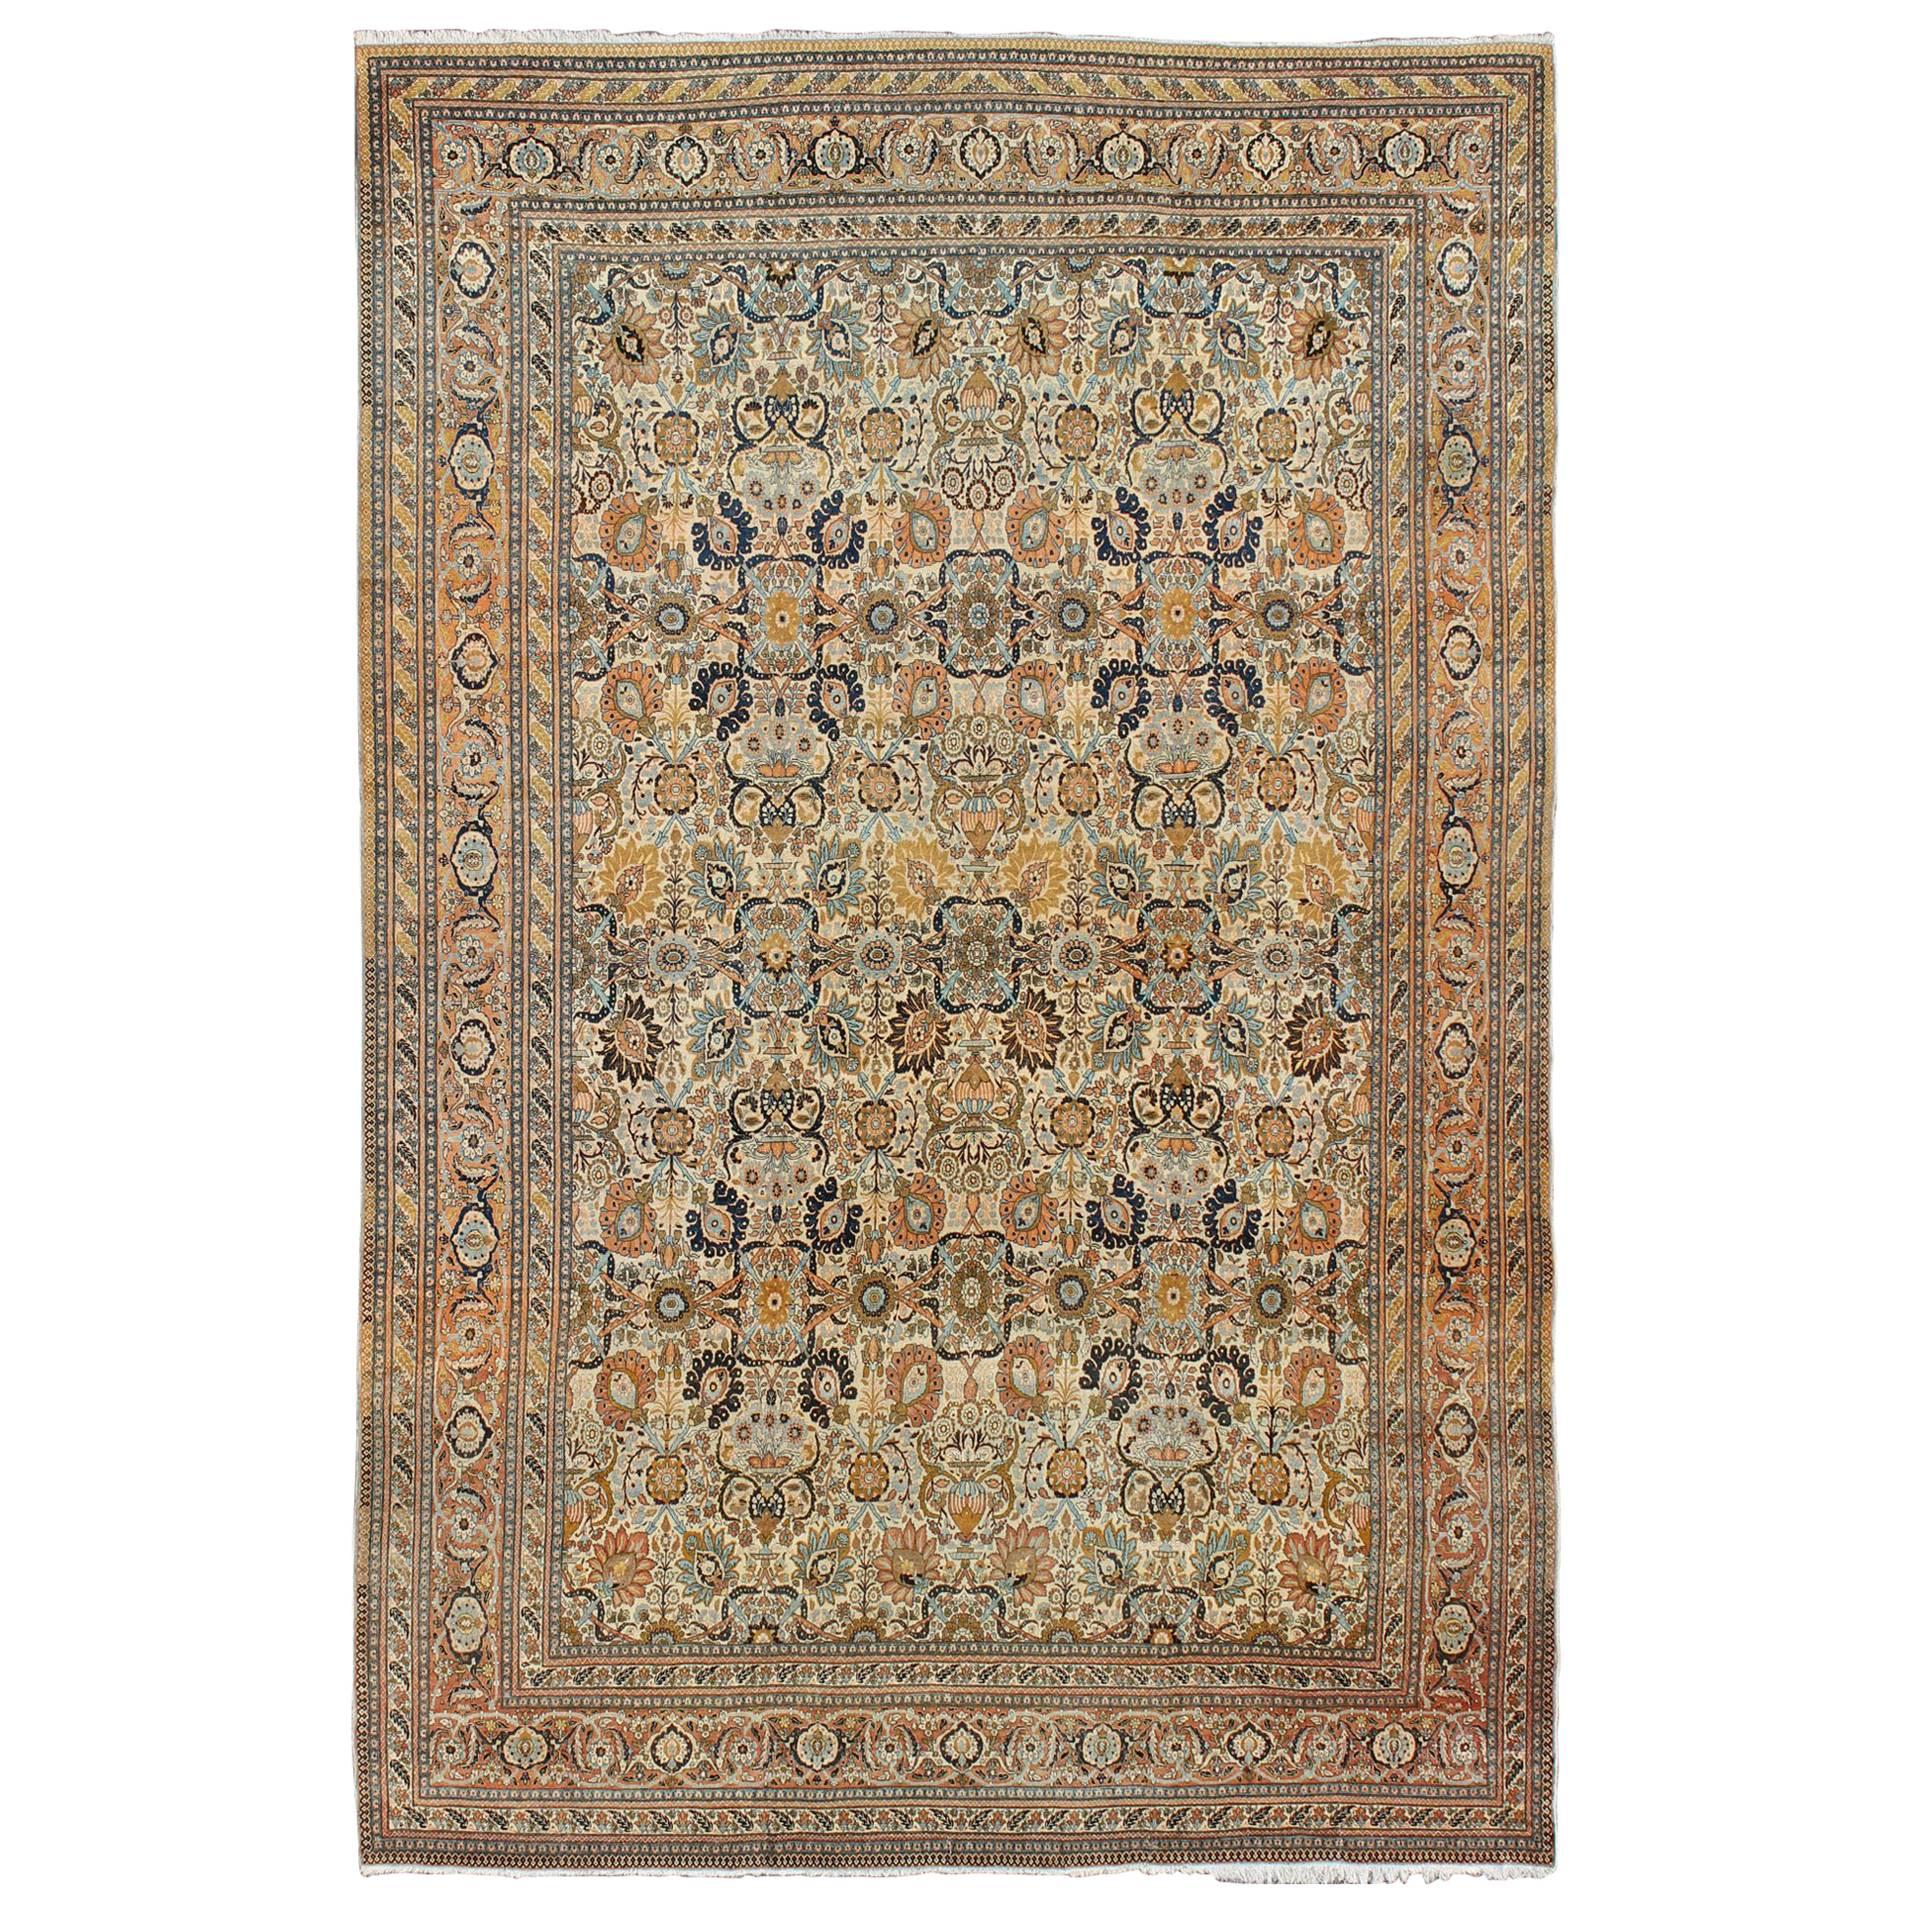 Very Fine colorful Antique Persian Tabriz Haj Jalili Rug in Ivory Background 